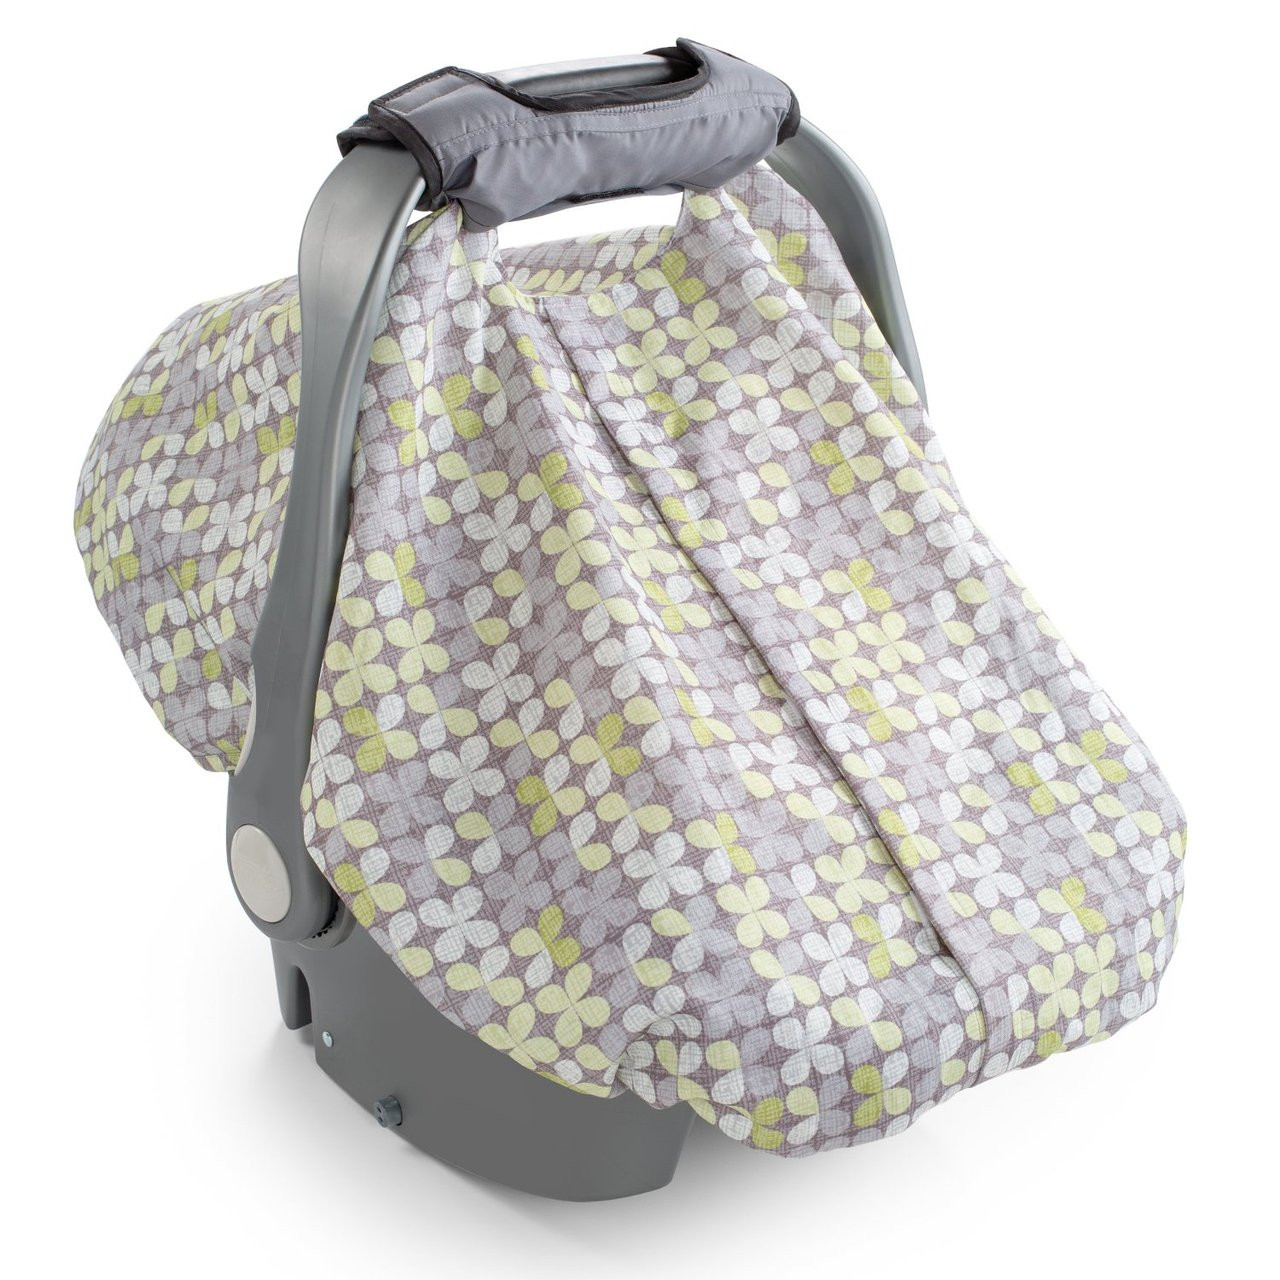 Summer Infant 2-in-1 Carry and Cover Infant Car Seat Cover, Clover -  Parents' Favorite